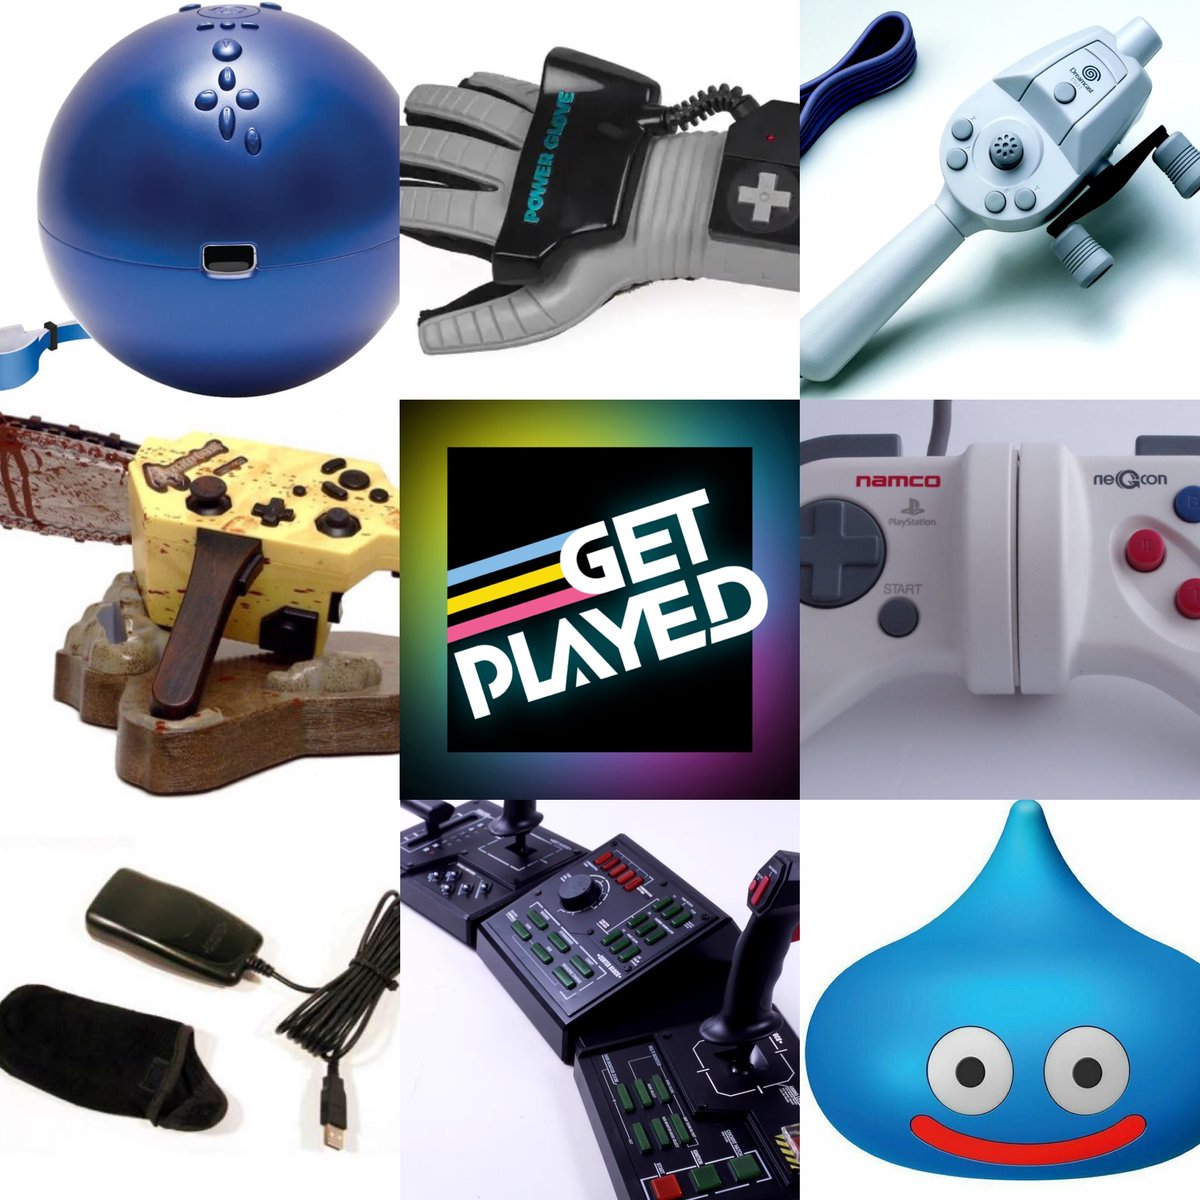 This week on Get Played Matt, Heather and Nick discuss and rank some of the weirdest controllers and peripherals ever made. Listen wherever you get your pods headgum.com/get-played or listen ad-free at patreon.com/getplayed